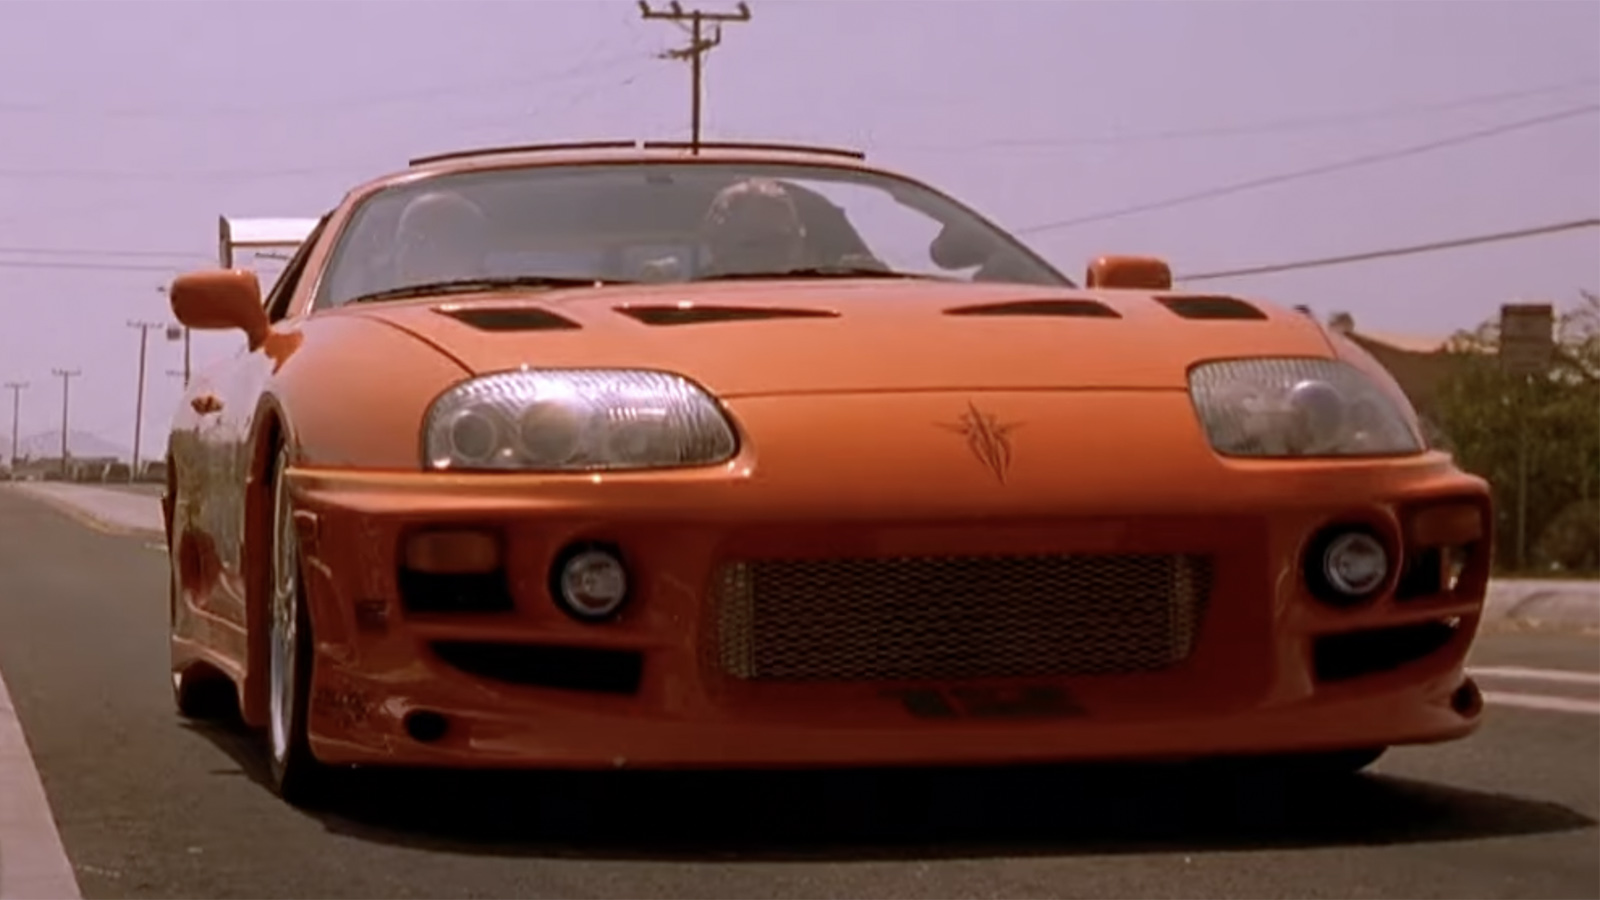 Toyota Supra – The Fast and the Furious